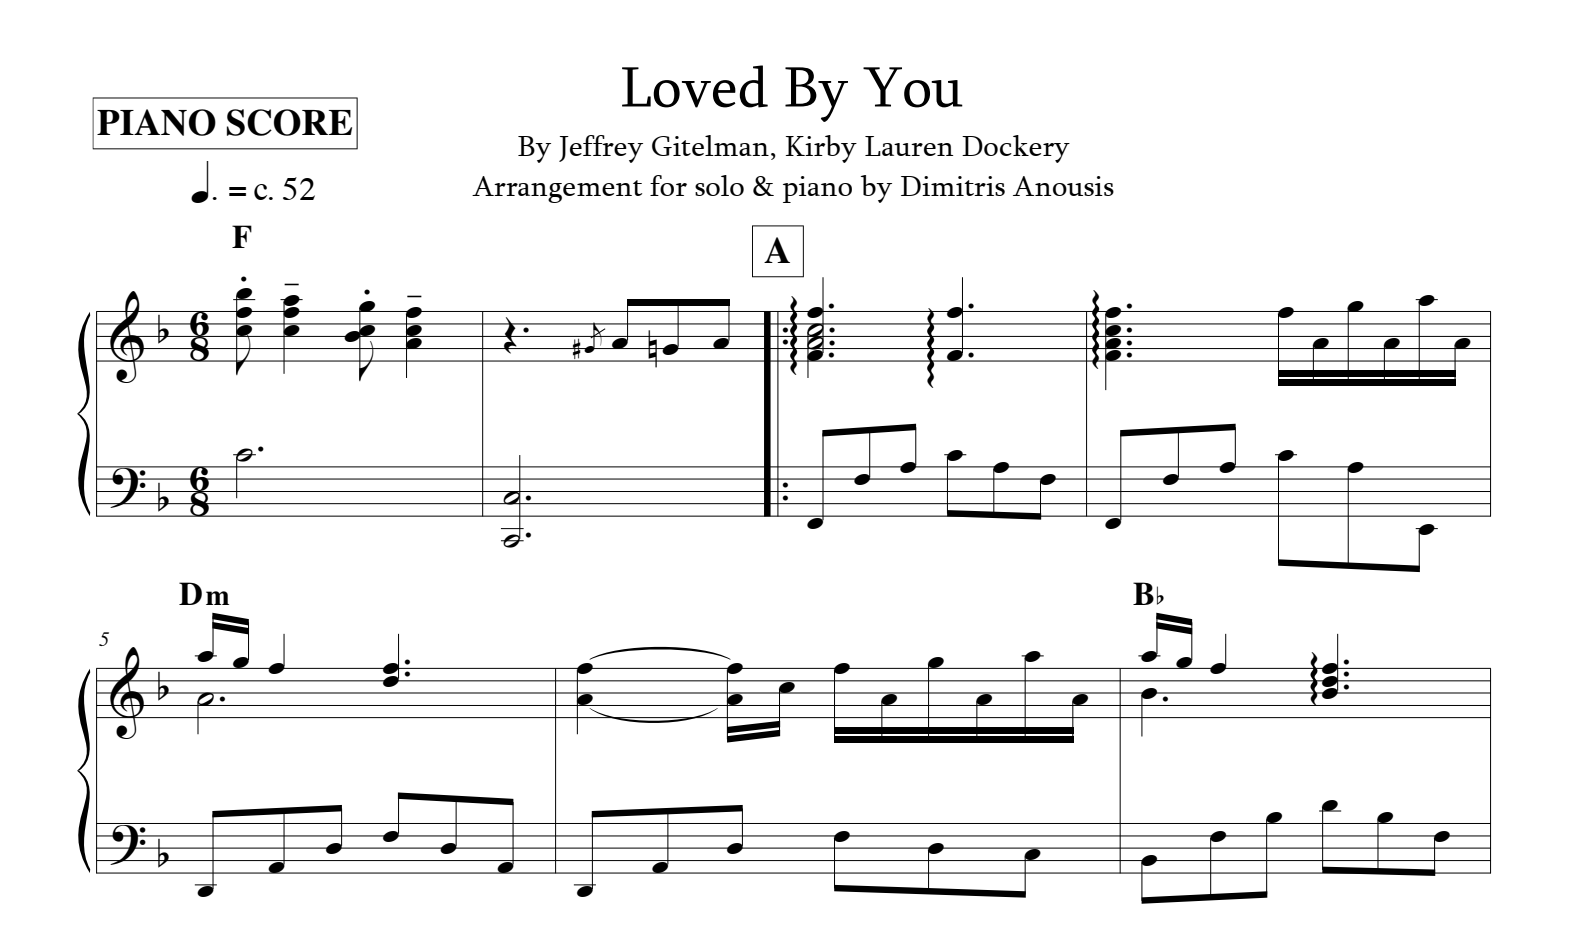 Loved By You for piano. Sheet music and midi files for piano.